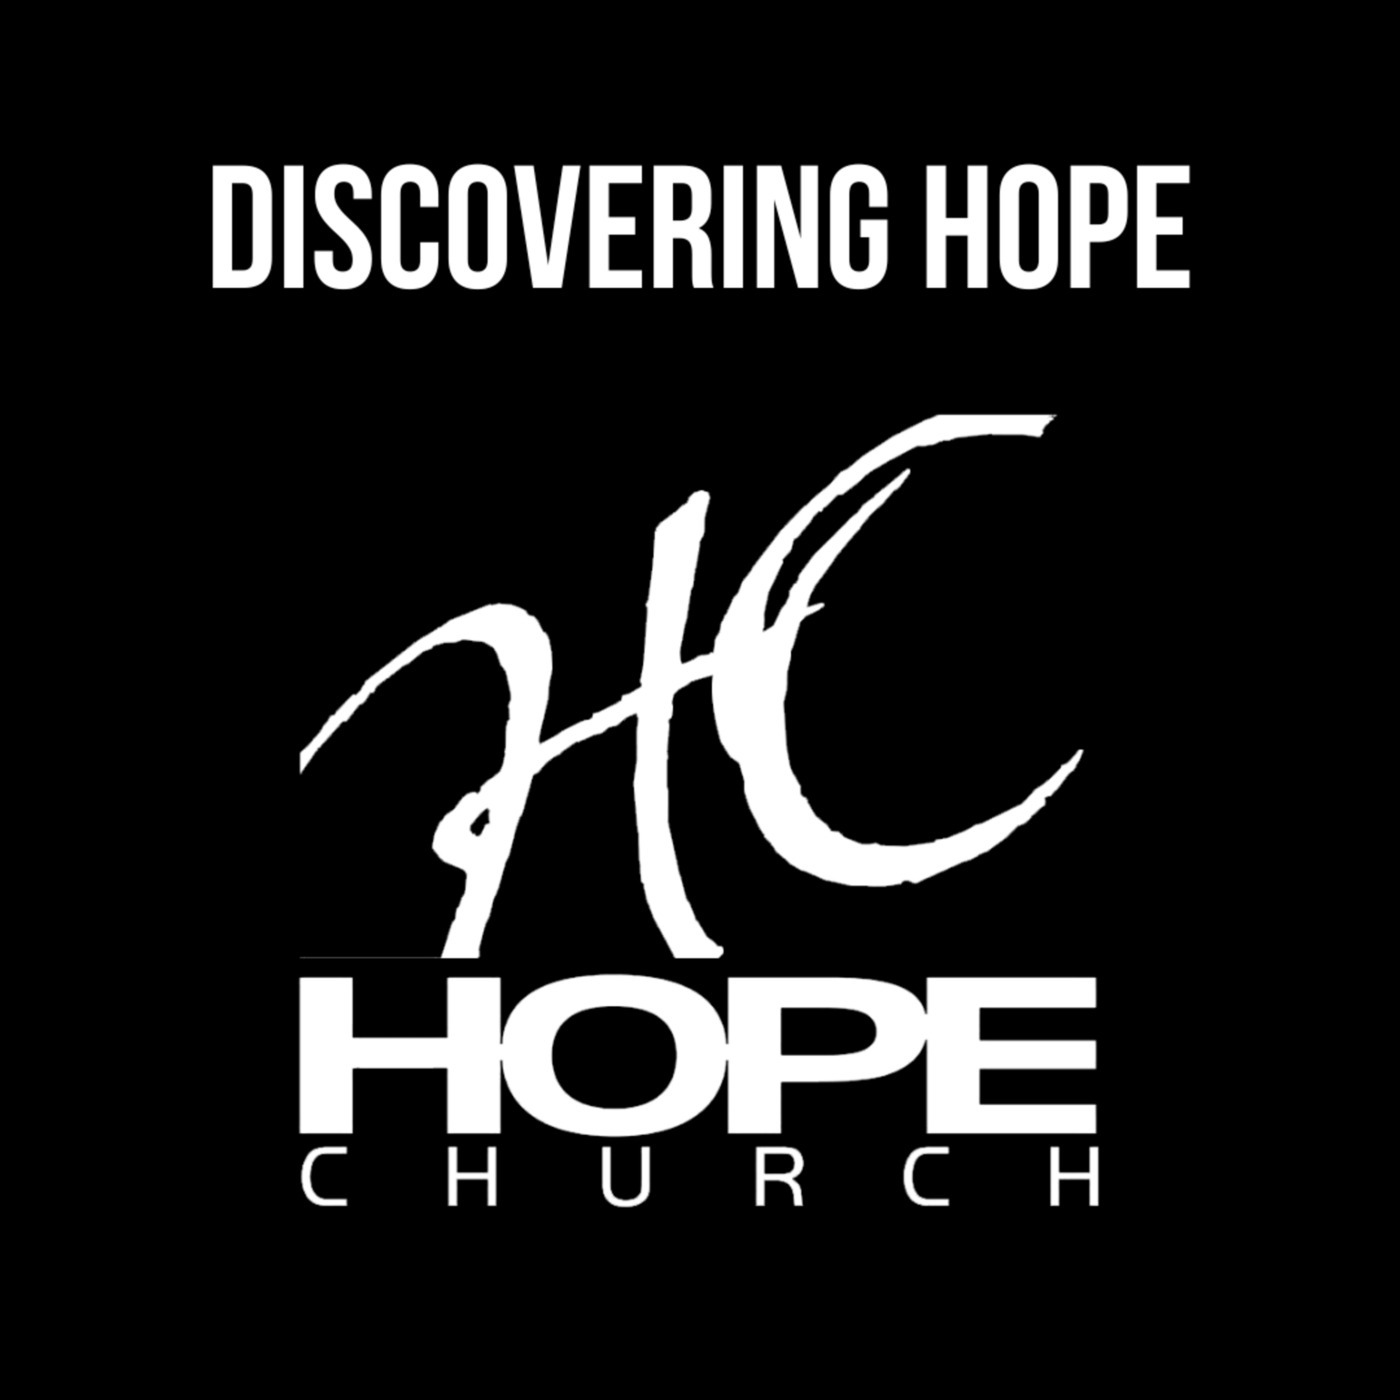 Discovering HOPE 91: When Opportunity Knocks